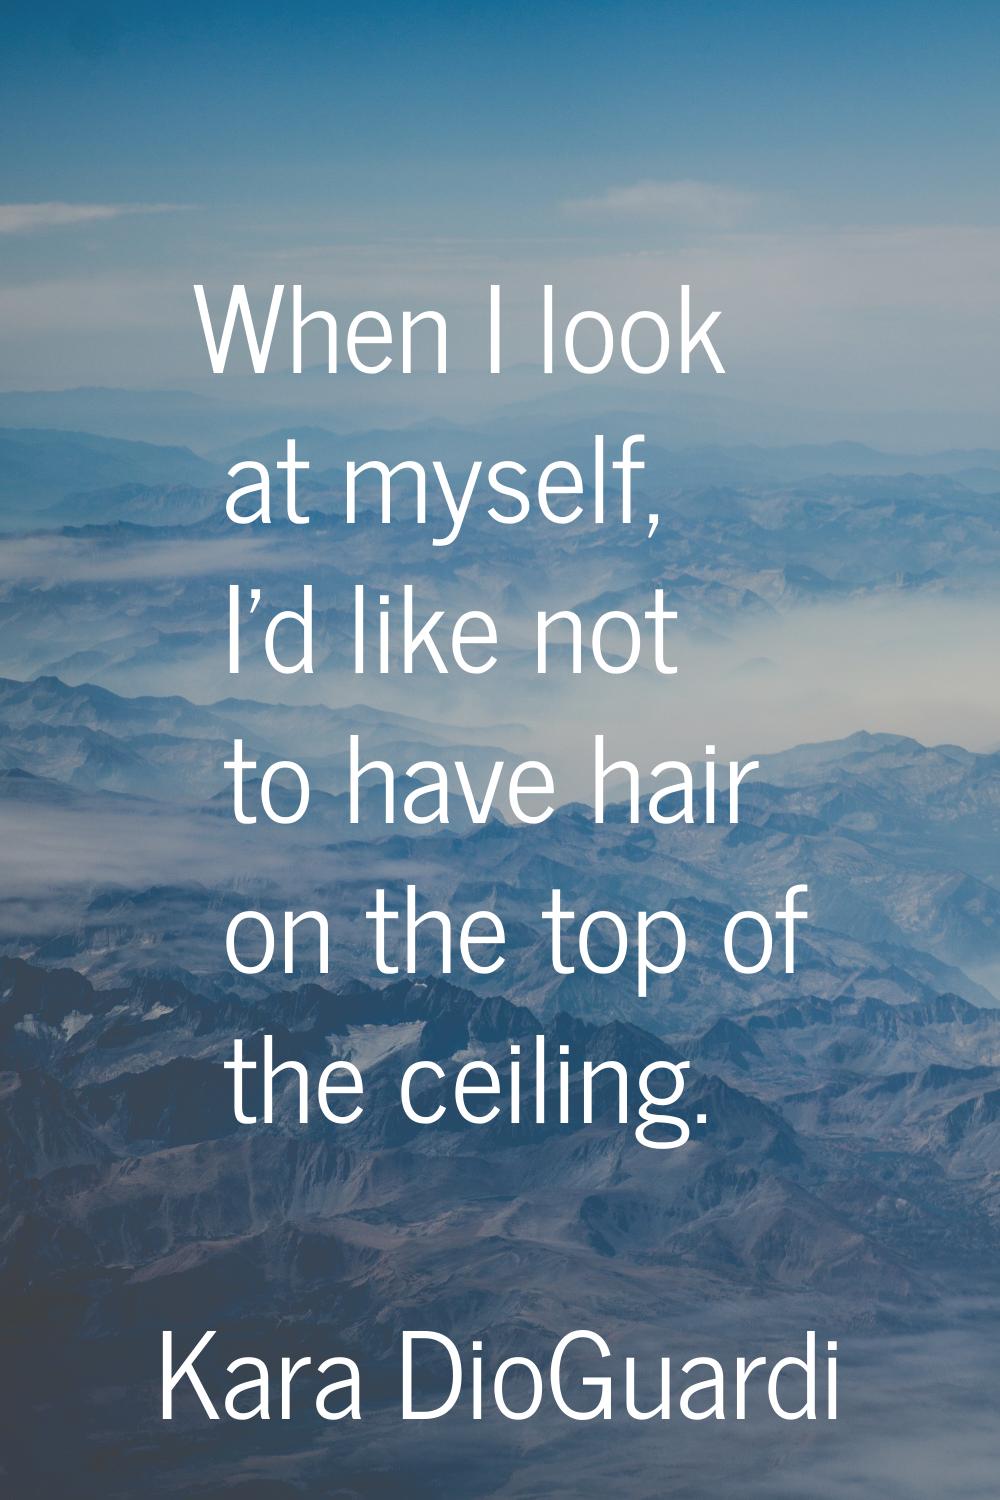 When I look at myself, I'd like not to have hair on the top of the ceiling.